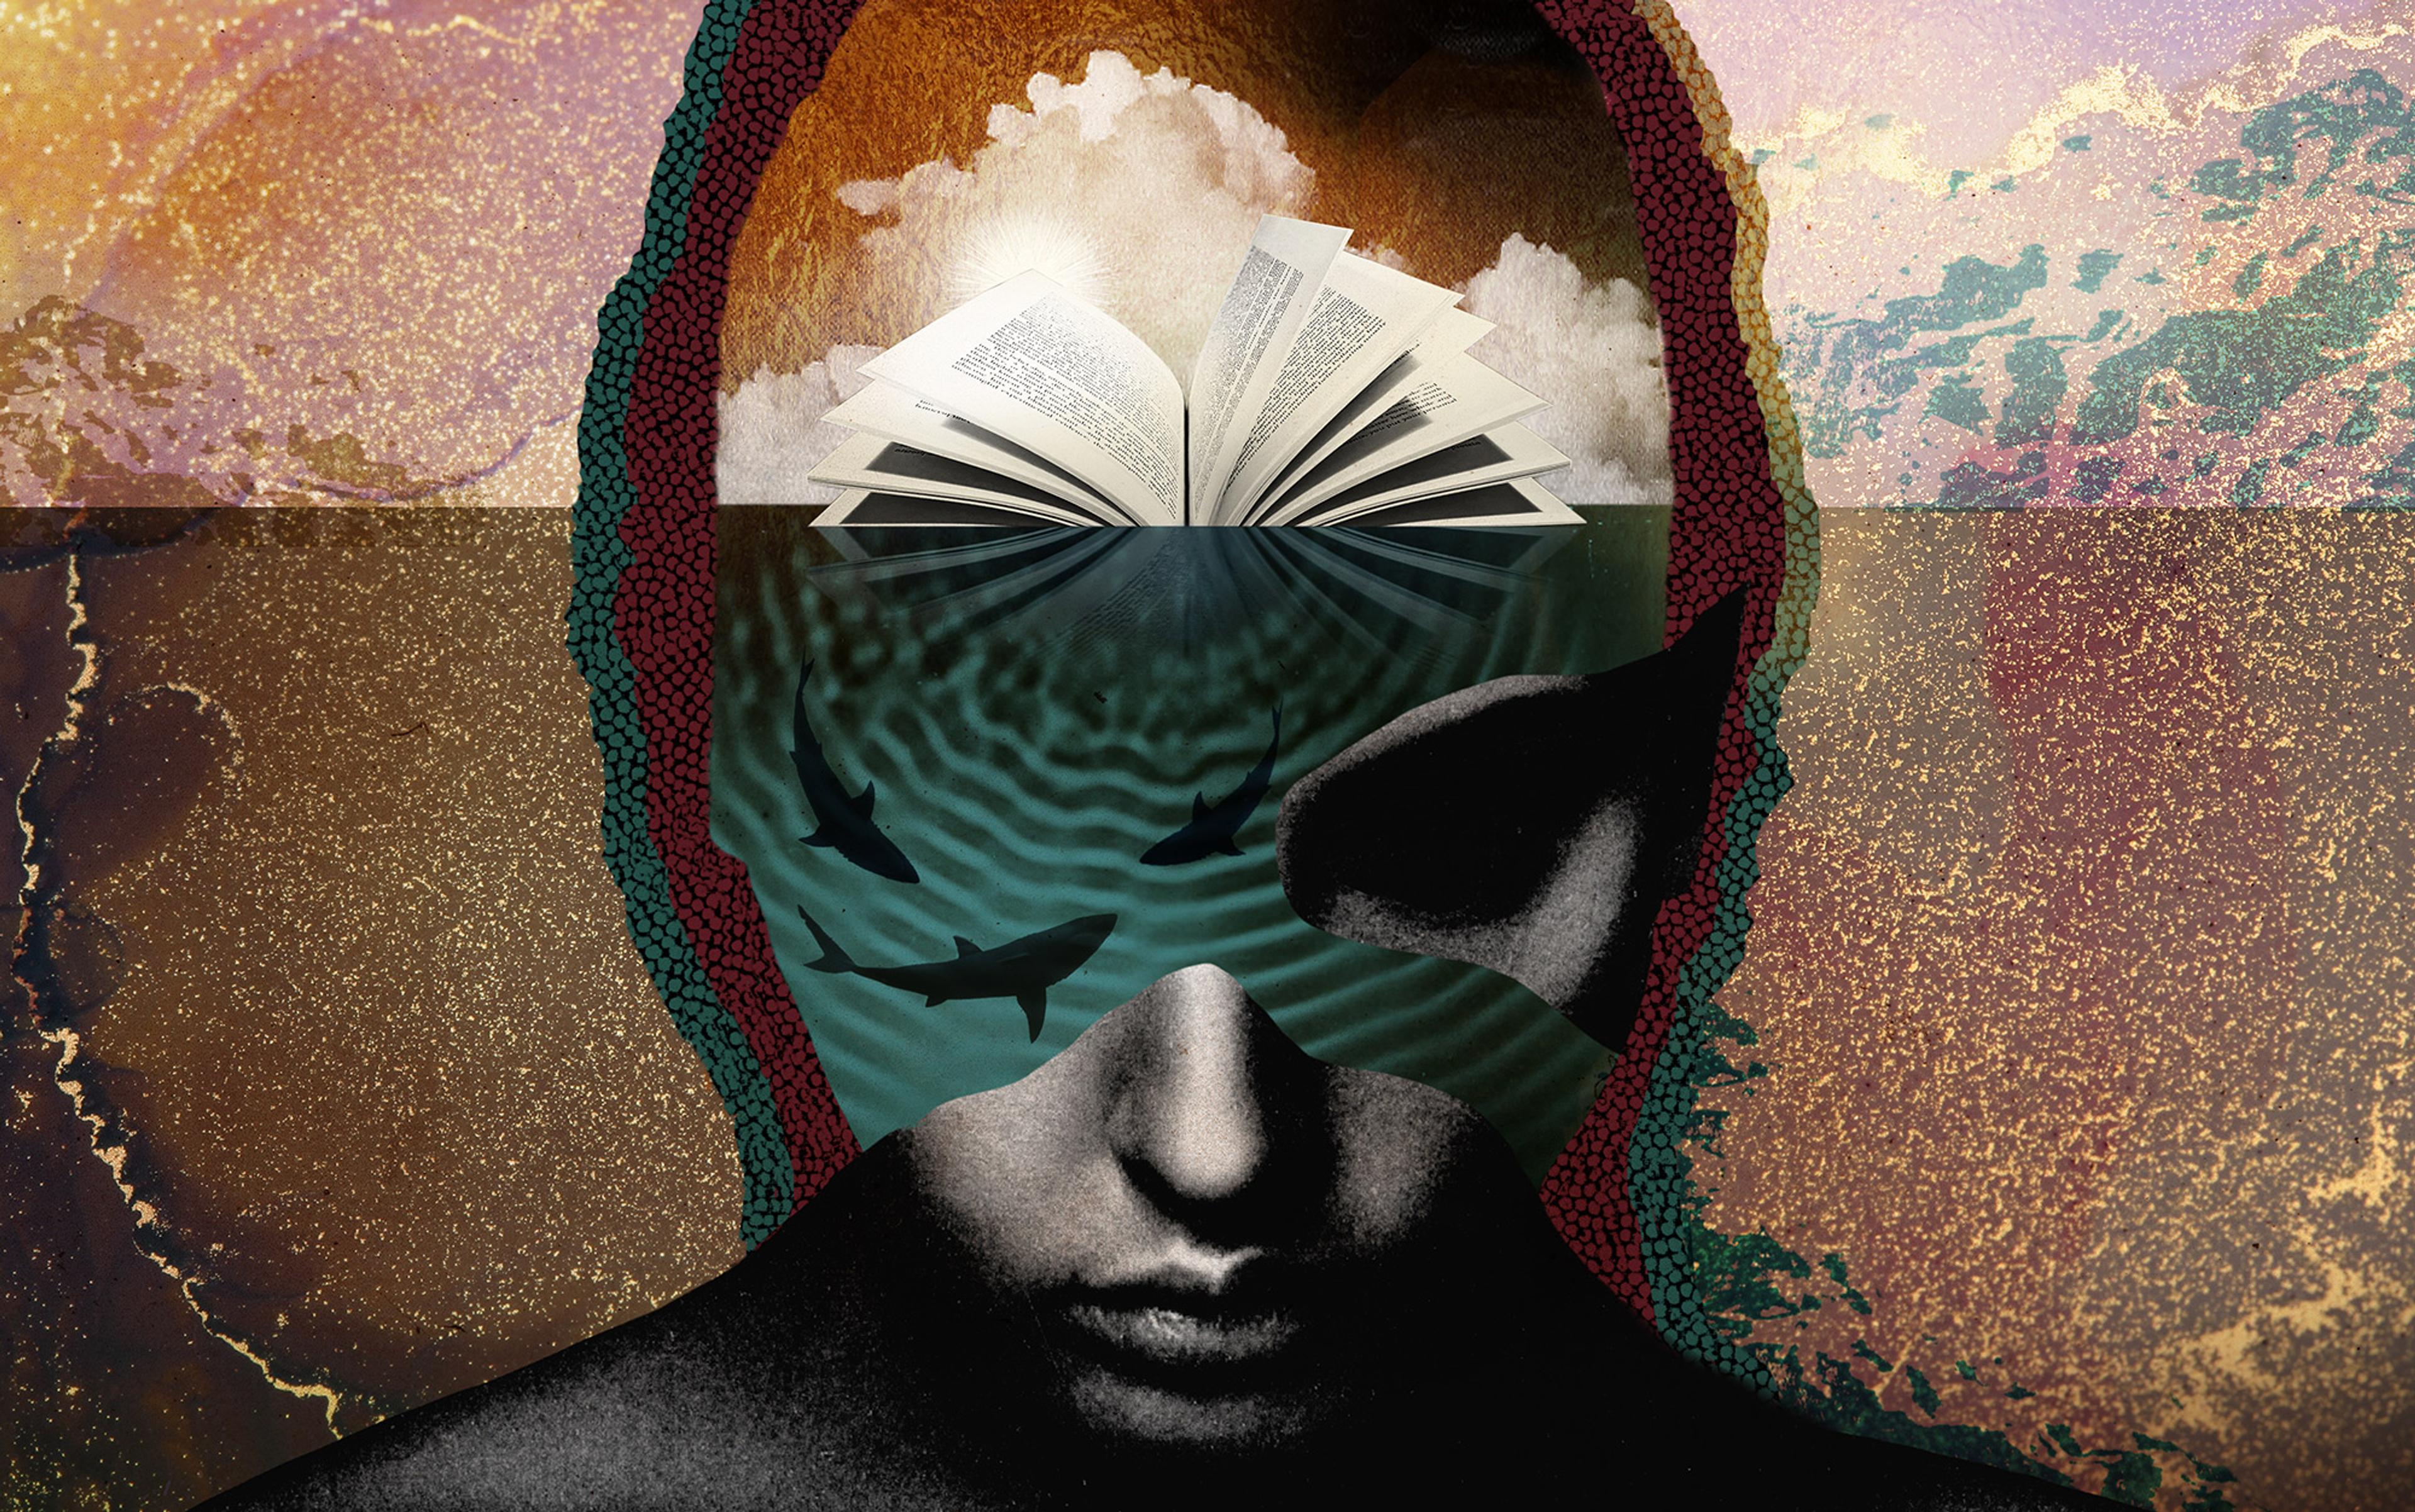 Surreal artwork of a human head. The top section contains an open book and clouds, the bottom section has deep water with sharks, all set in an abstract background.